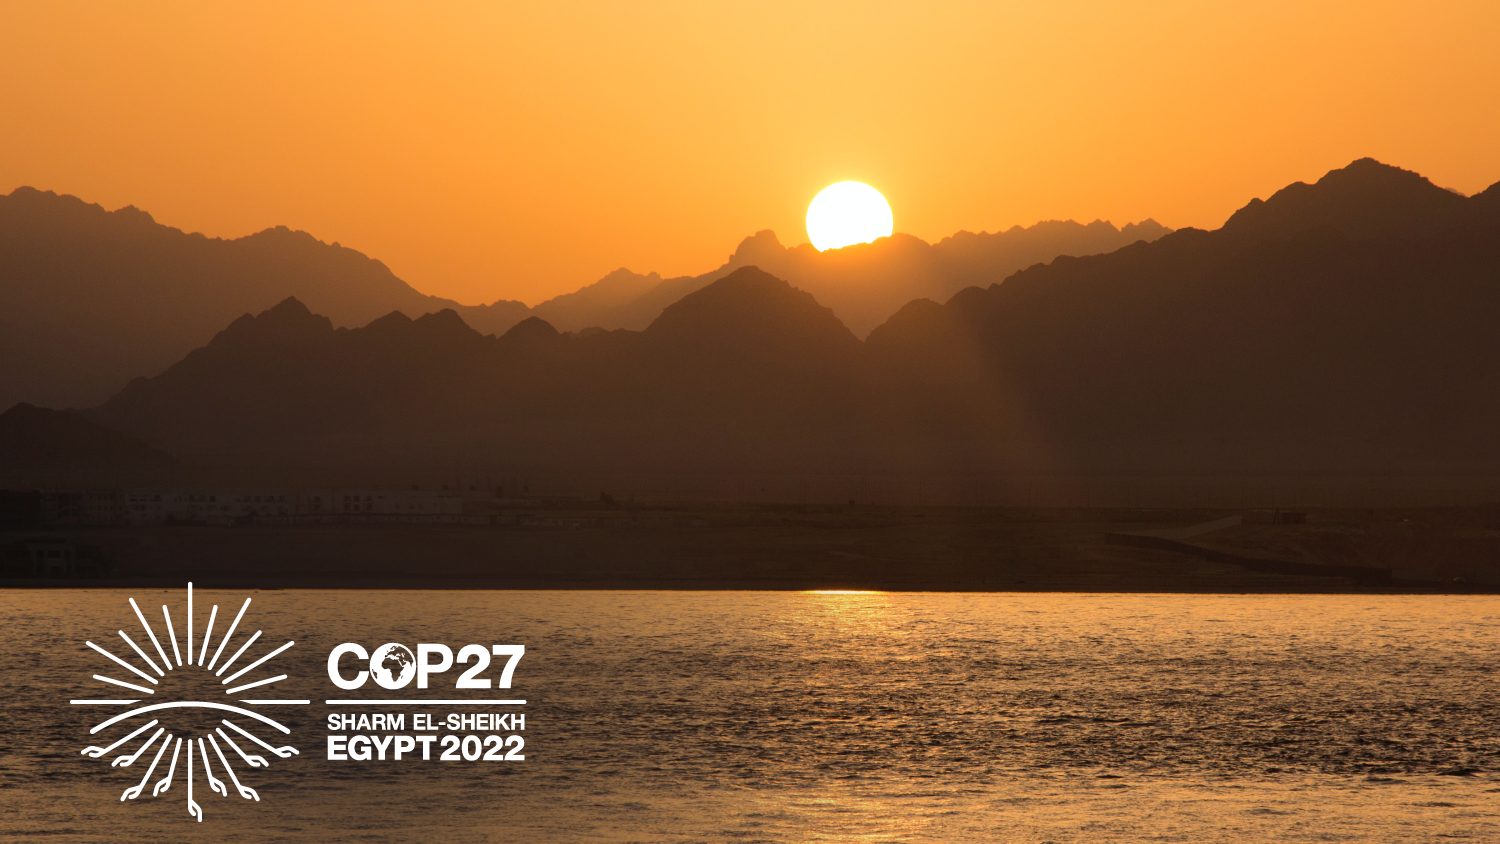 Sharm El-Sheikh, Qesm Sharm Ash Sheikh, Egypt - sun rising behind silhouettes of mountains overlooking a body of water